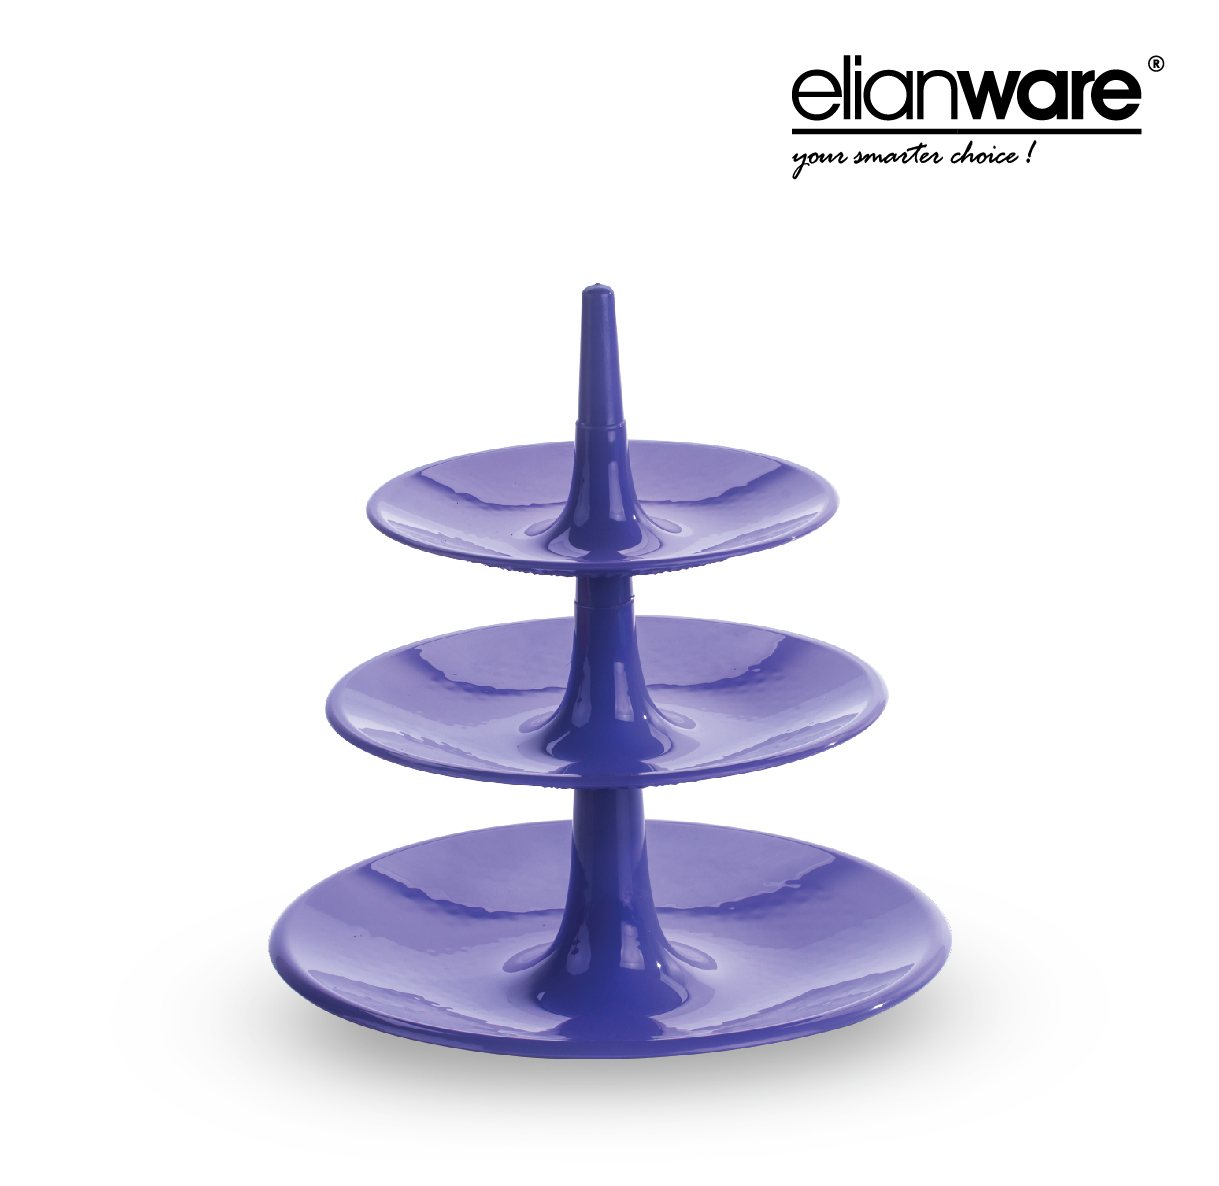 ELIANWARE Cup Cake Stand, Muffin Cake Stand, Round Shape, 3 Tier / 3 Tingkat